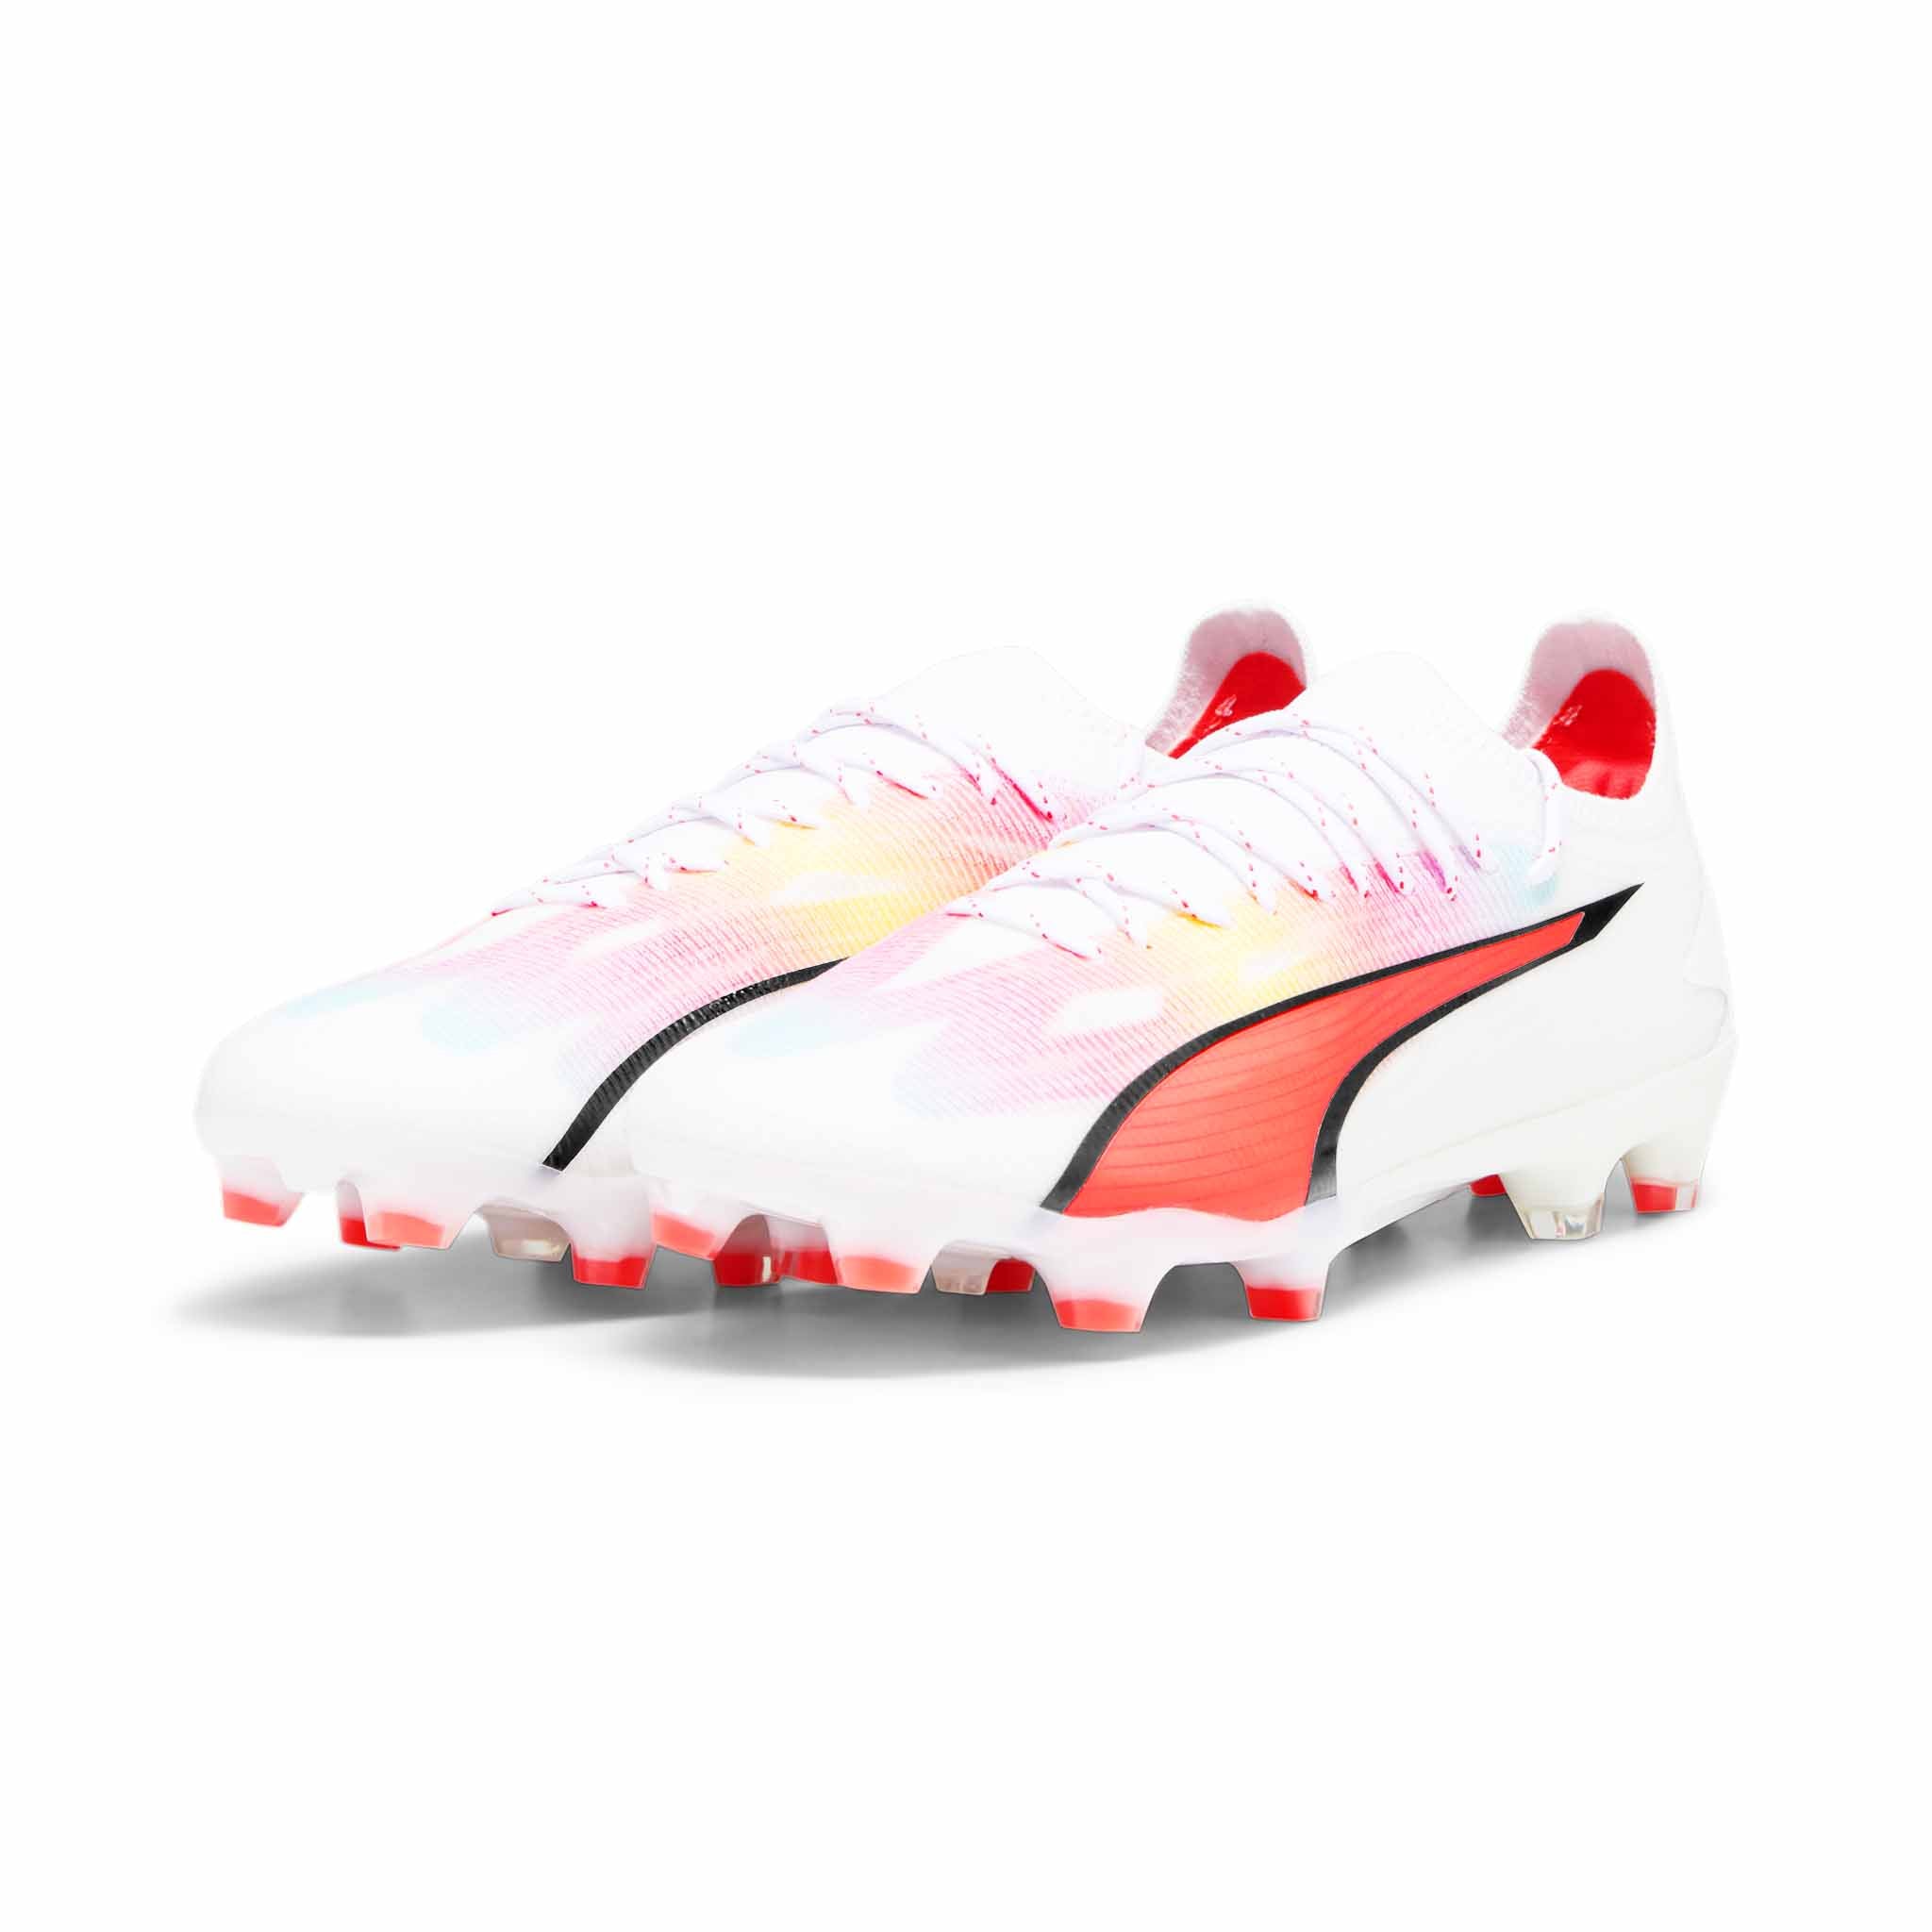 Puma Ultra Ultimate FG/AG soccer shoes adult cleats - Soccer Sport